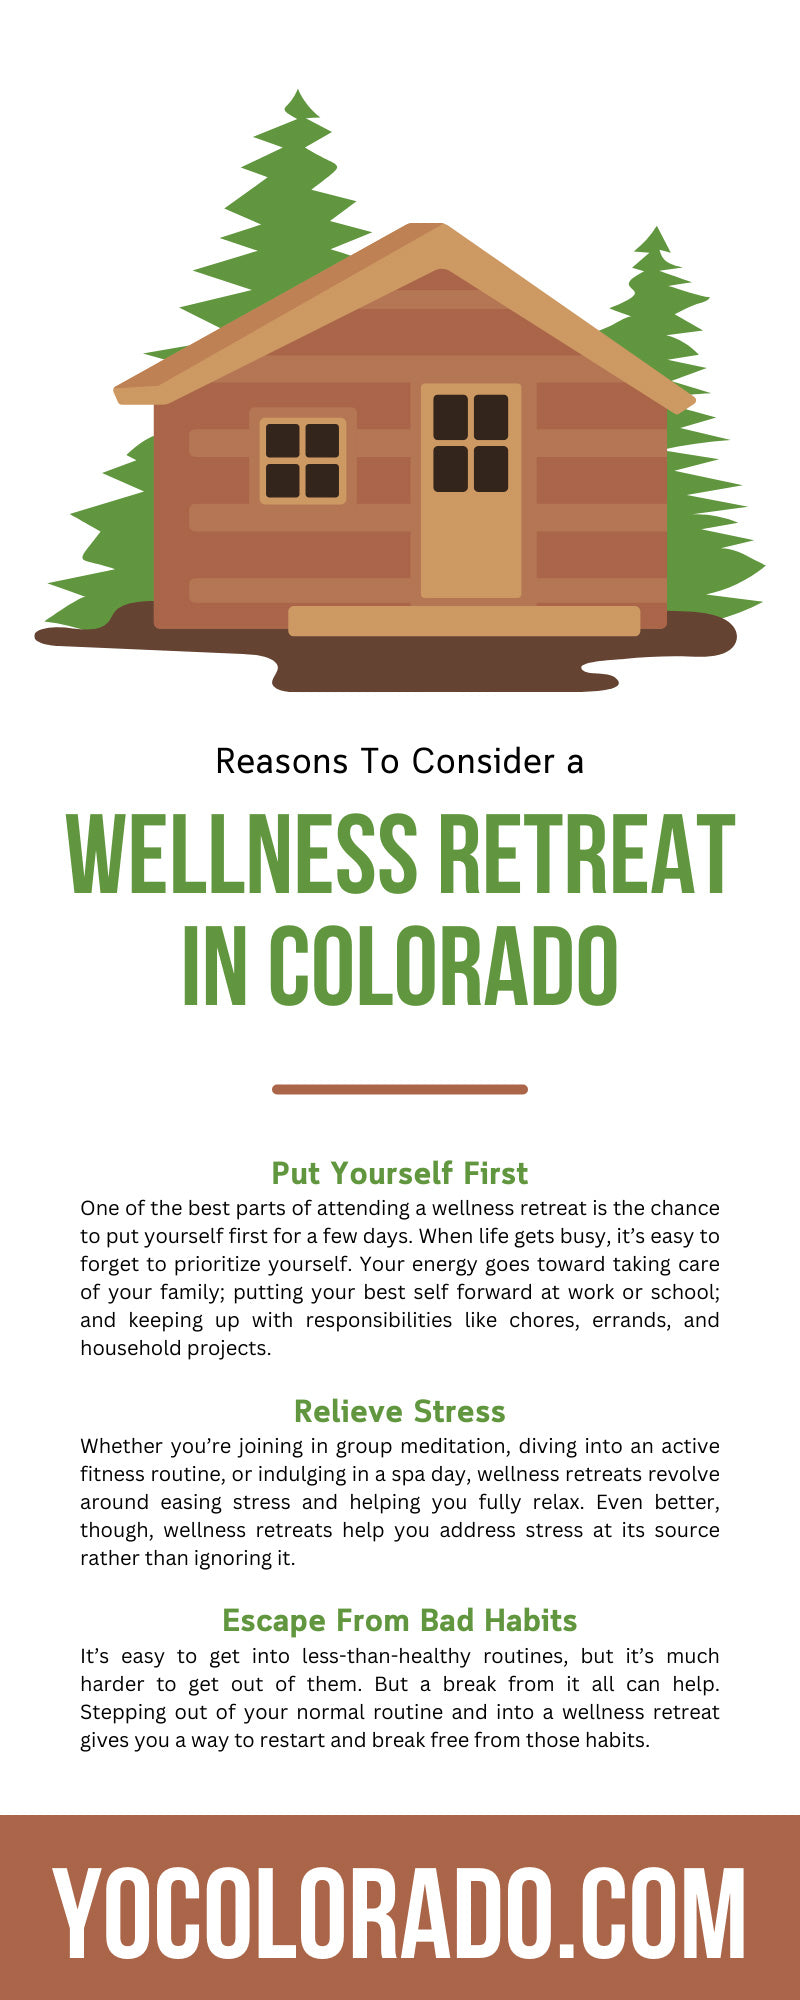 Reasons To Consider a Wellness Retreat in Colorado